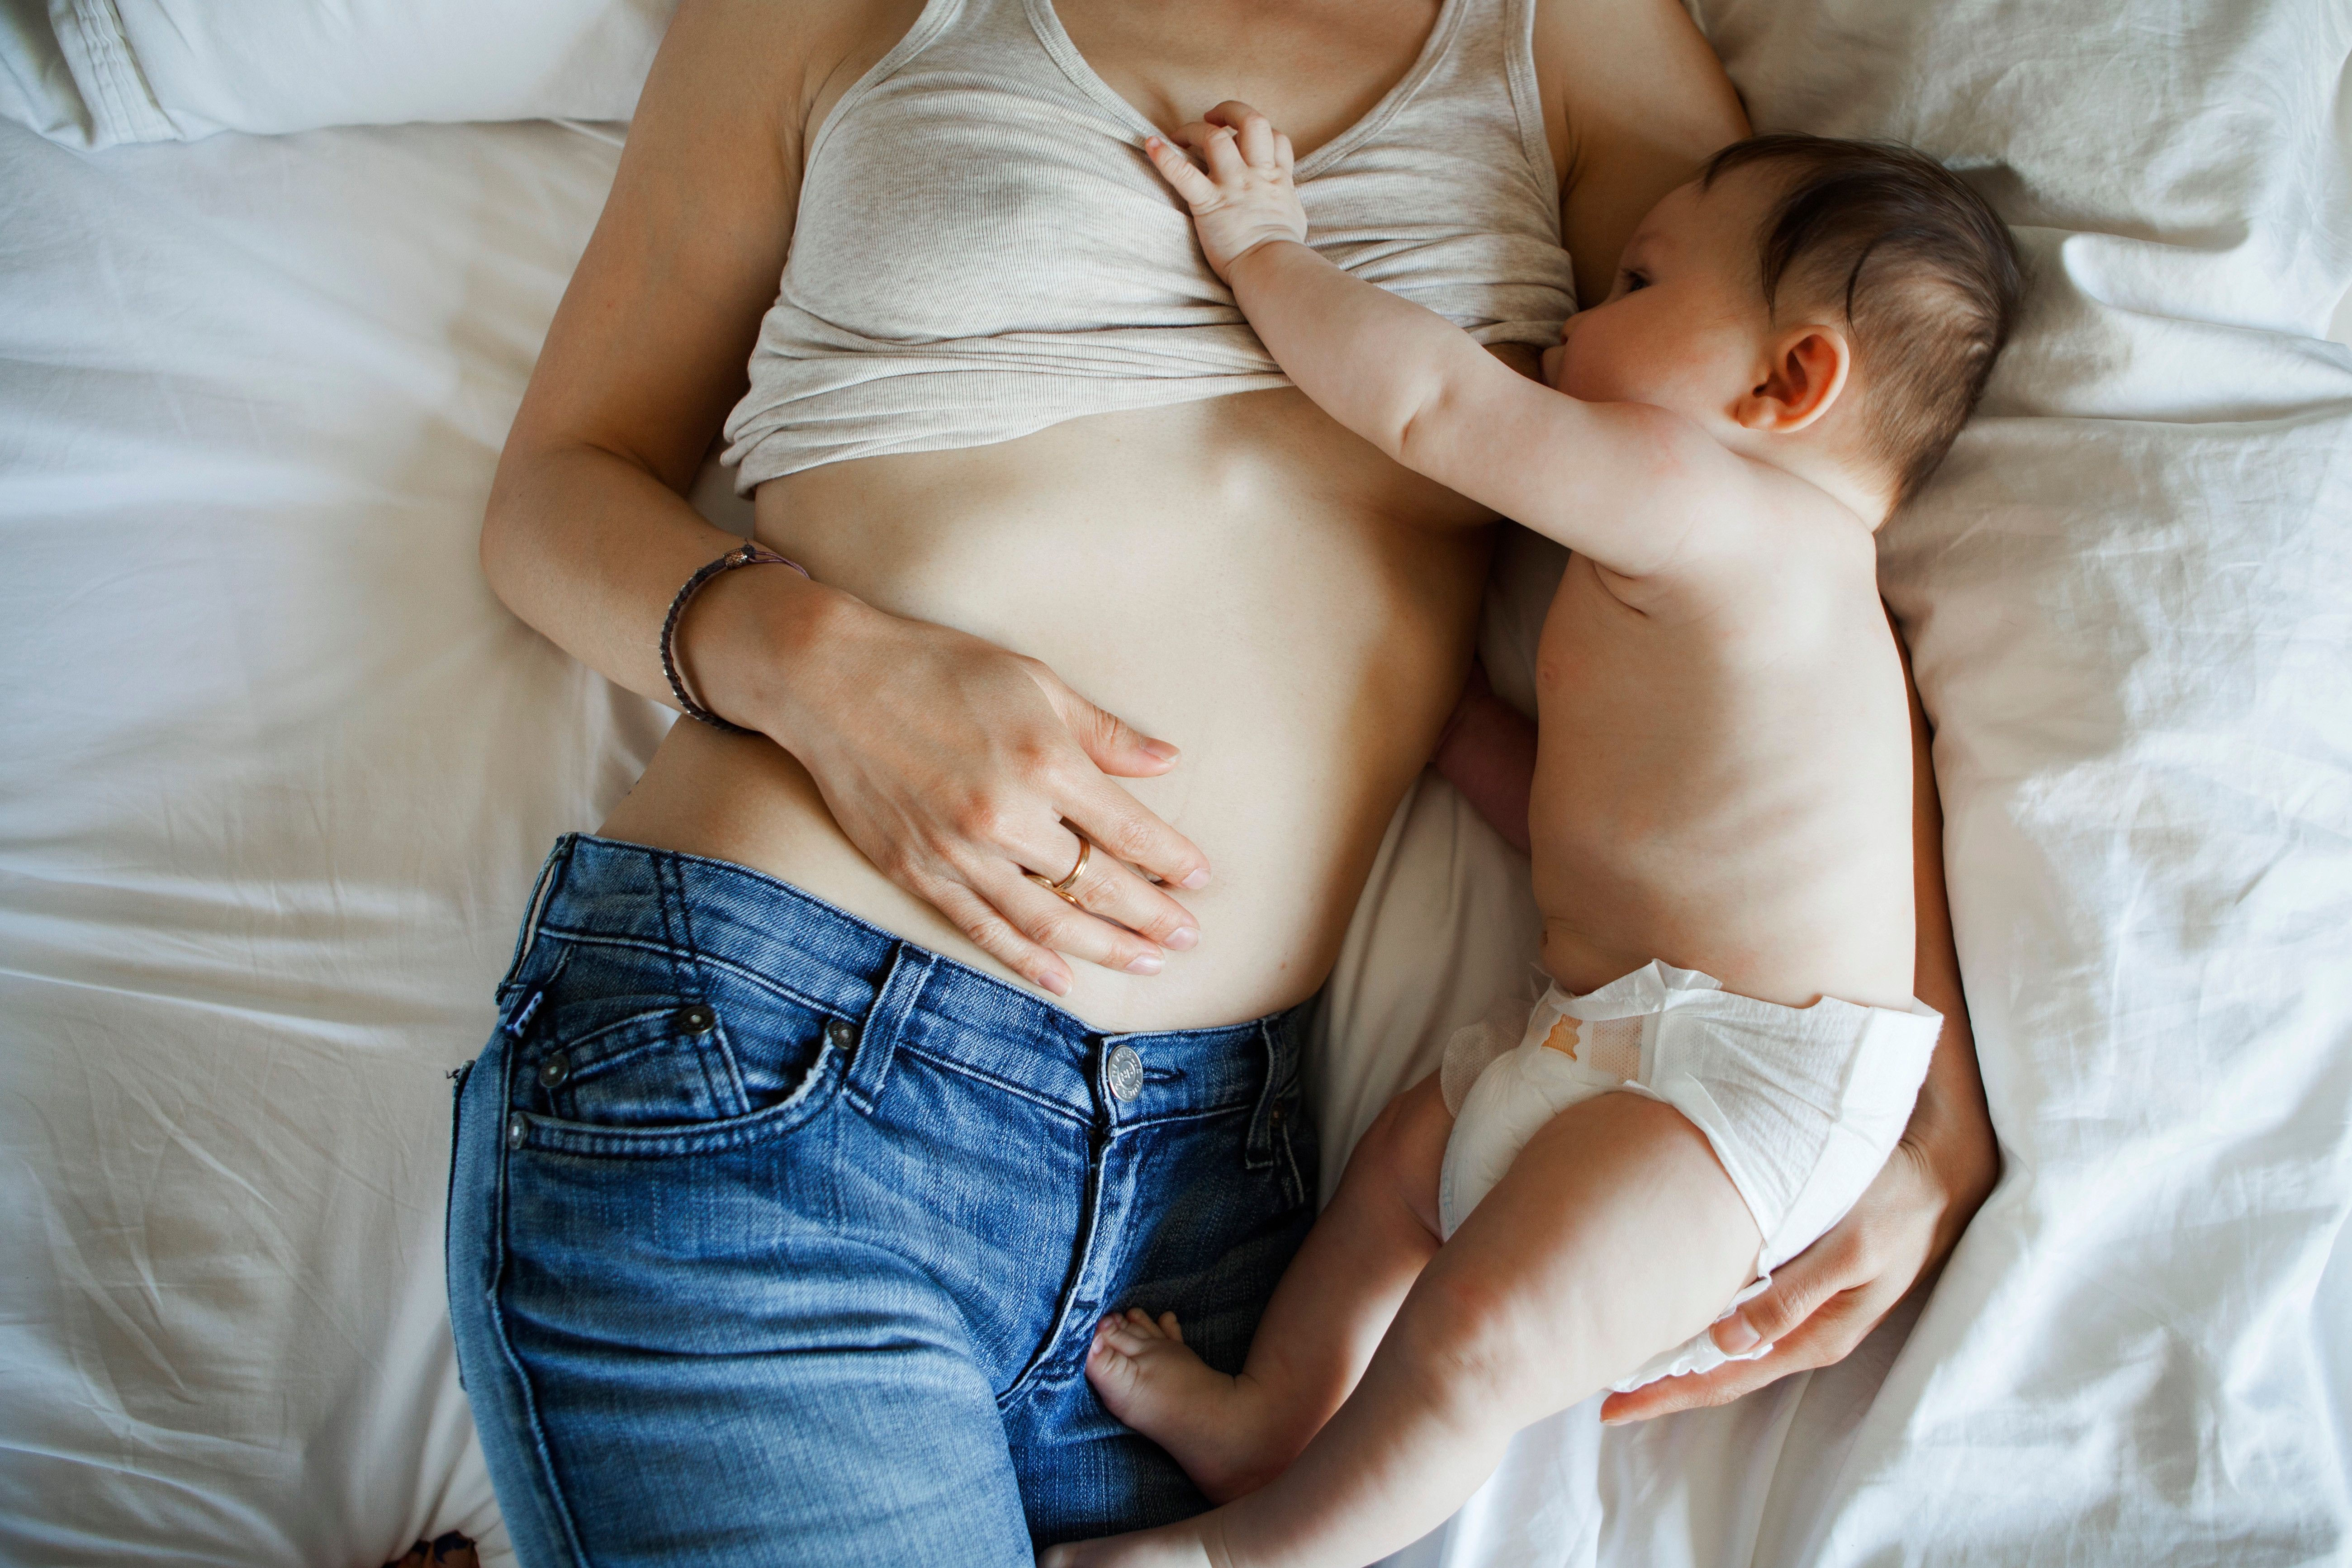 When New Parents Have Sex, What Do They Do With Their Babies?